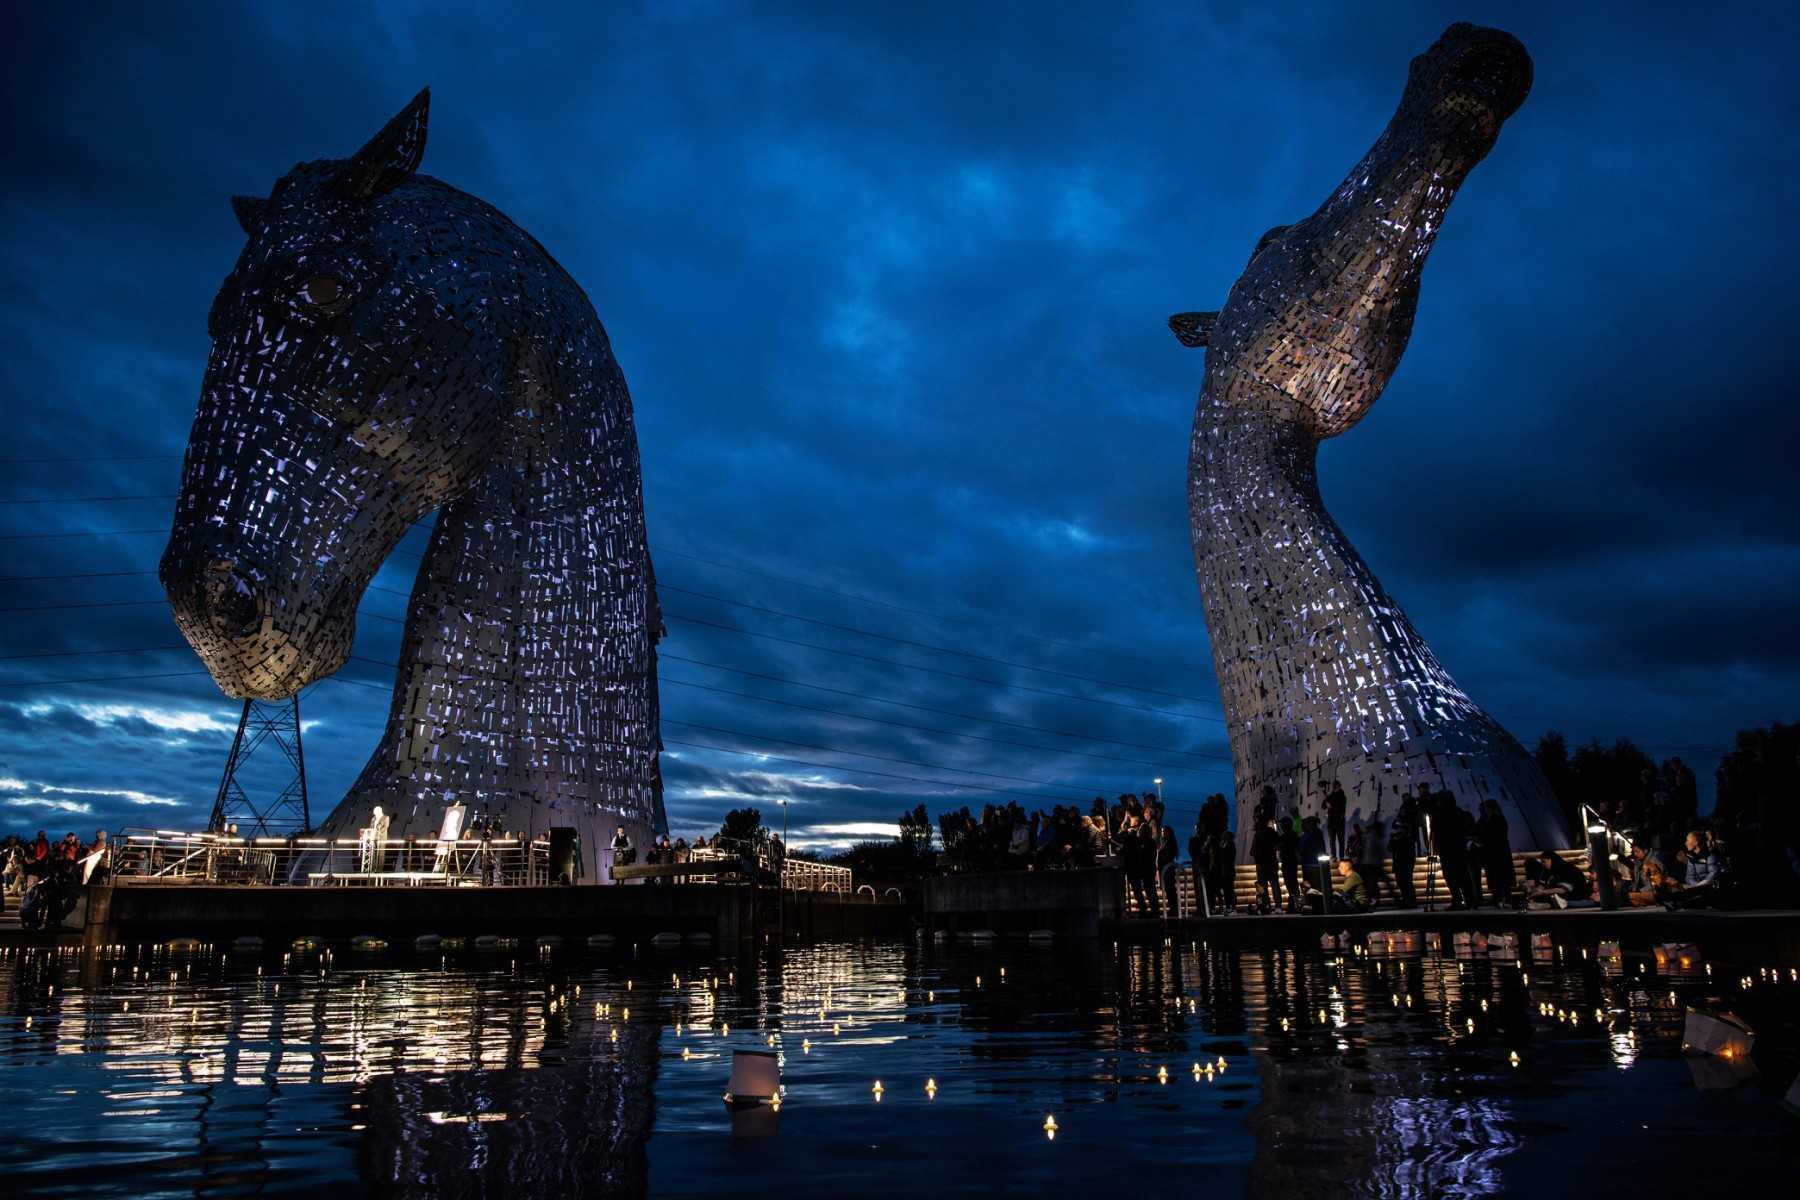 The Kelpies statues are illuminated as members of the public hold a service of reflection to show their respect to the late Queen Elizabeth II, in Falkirk, Scotland on Sept 18, ahead of her State Funeral on Monday. Photo: AFP